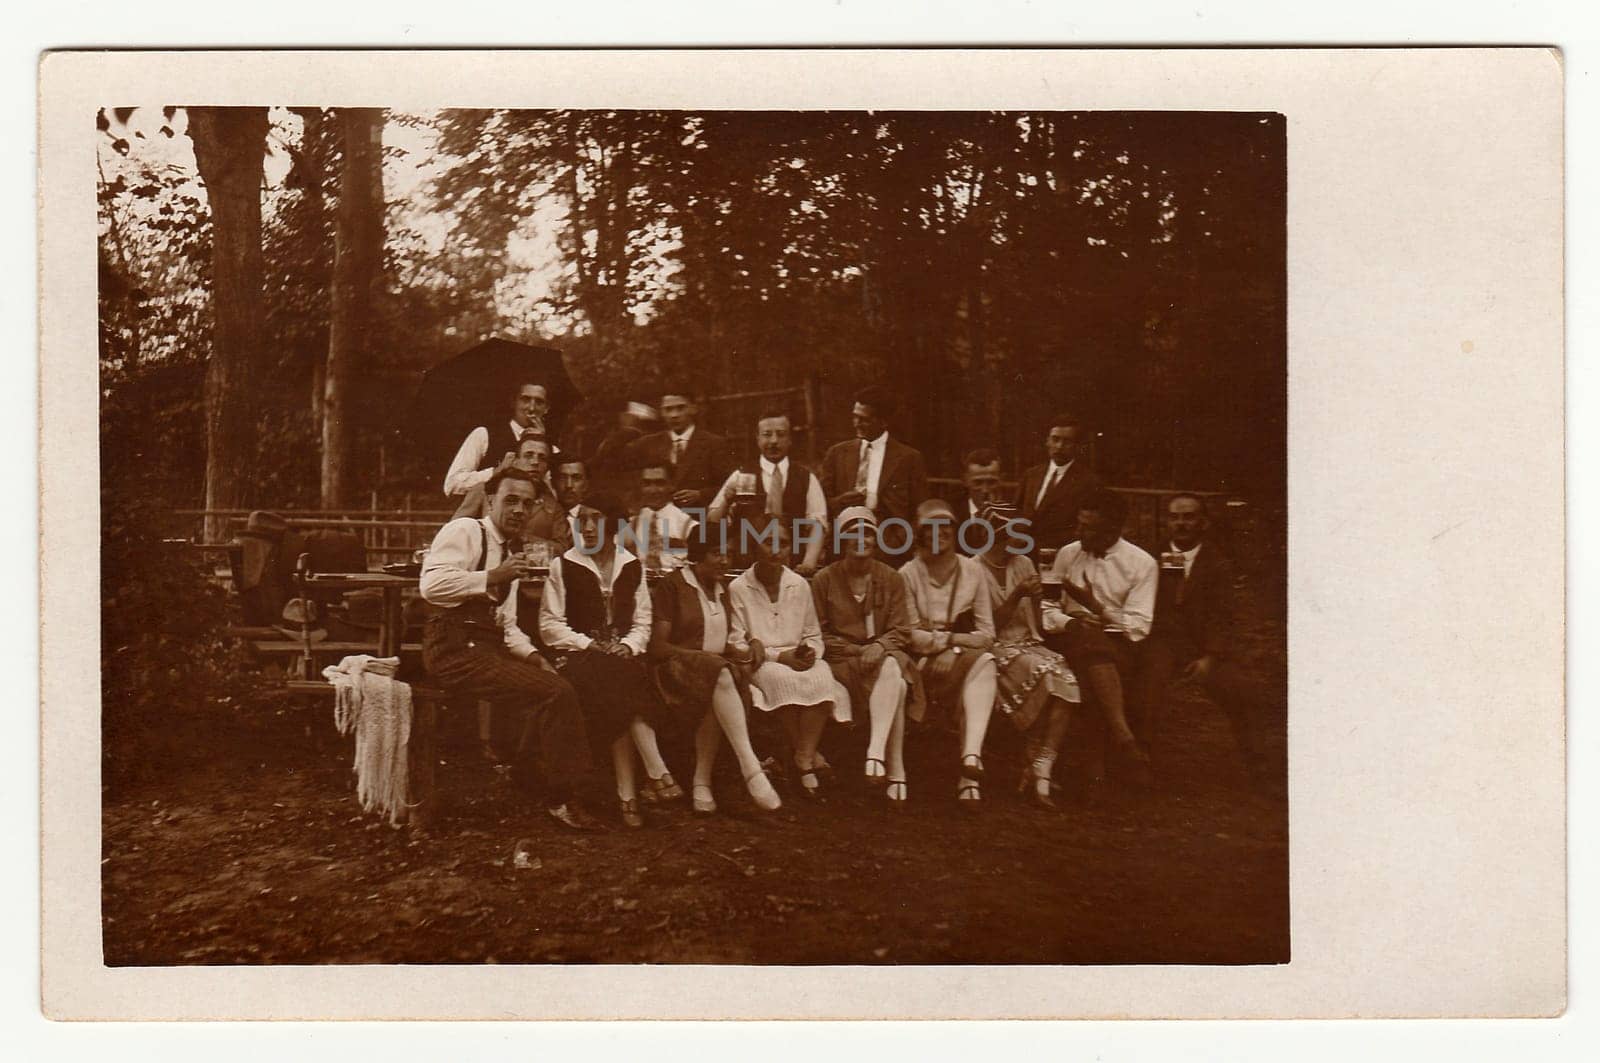 THE CZECHOSLOVAK REPUBLIC, CIRCA 1930s: Vintage photo shows group of people in nature, circa 1930s